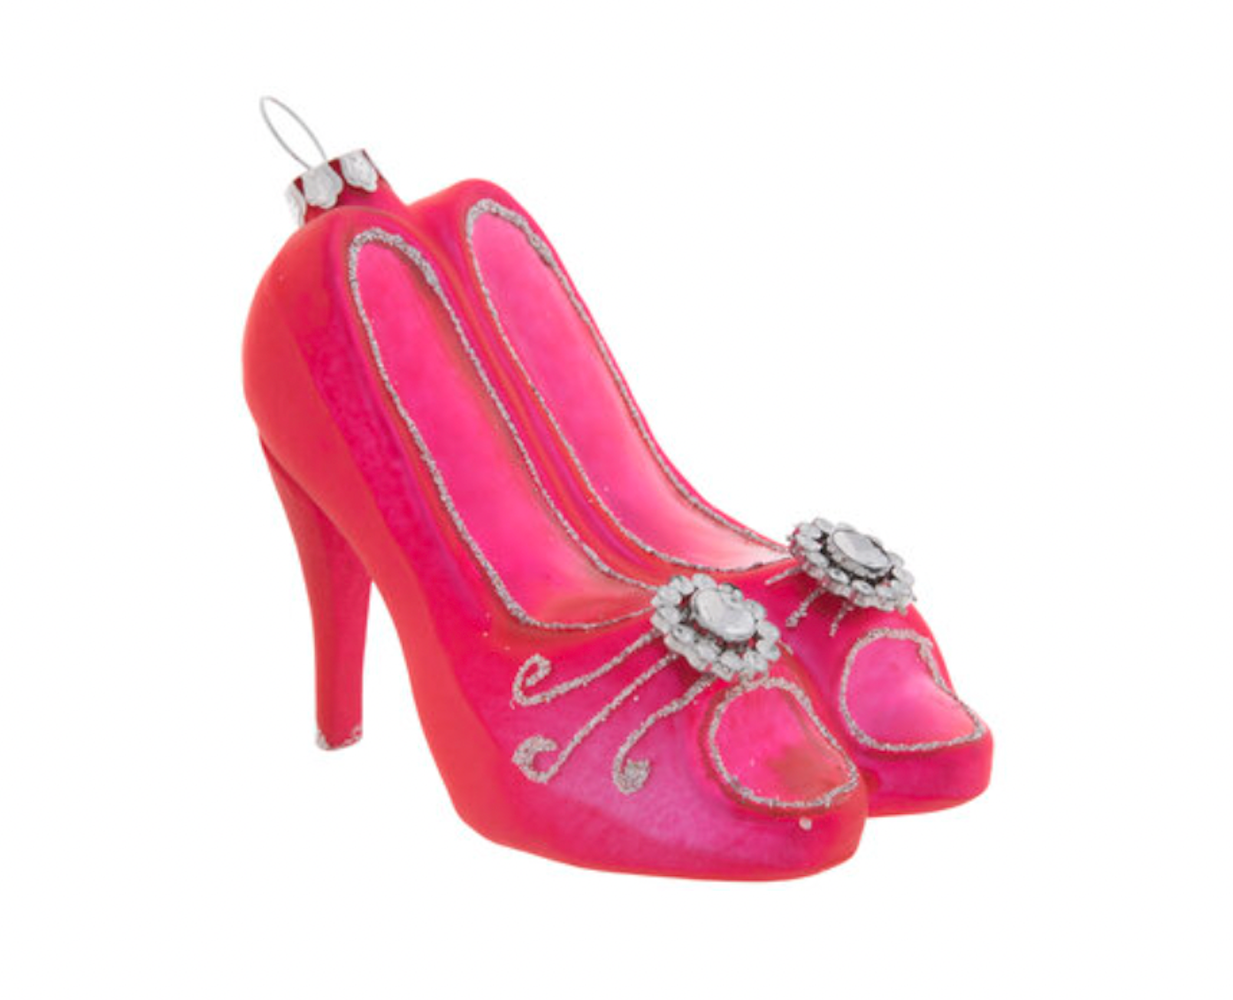 Robert Stanley Hot Pink High Heels Glass Christmas Ornament New with Tag